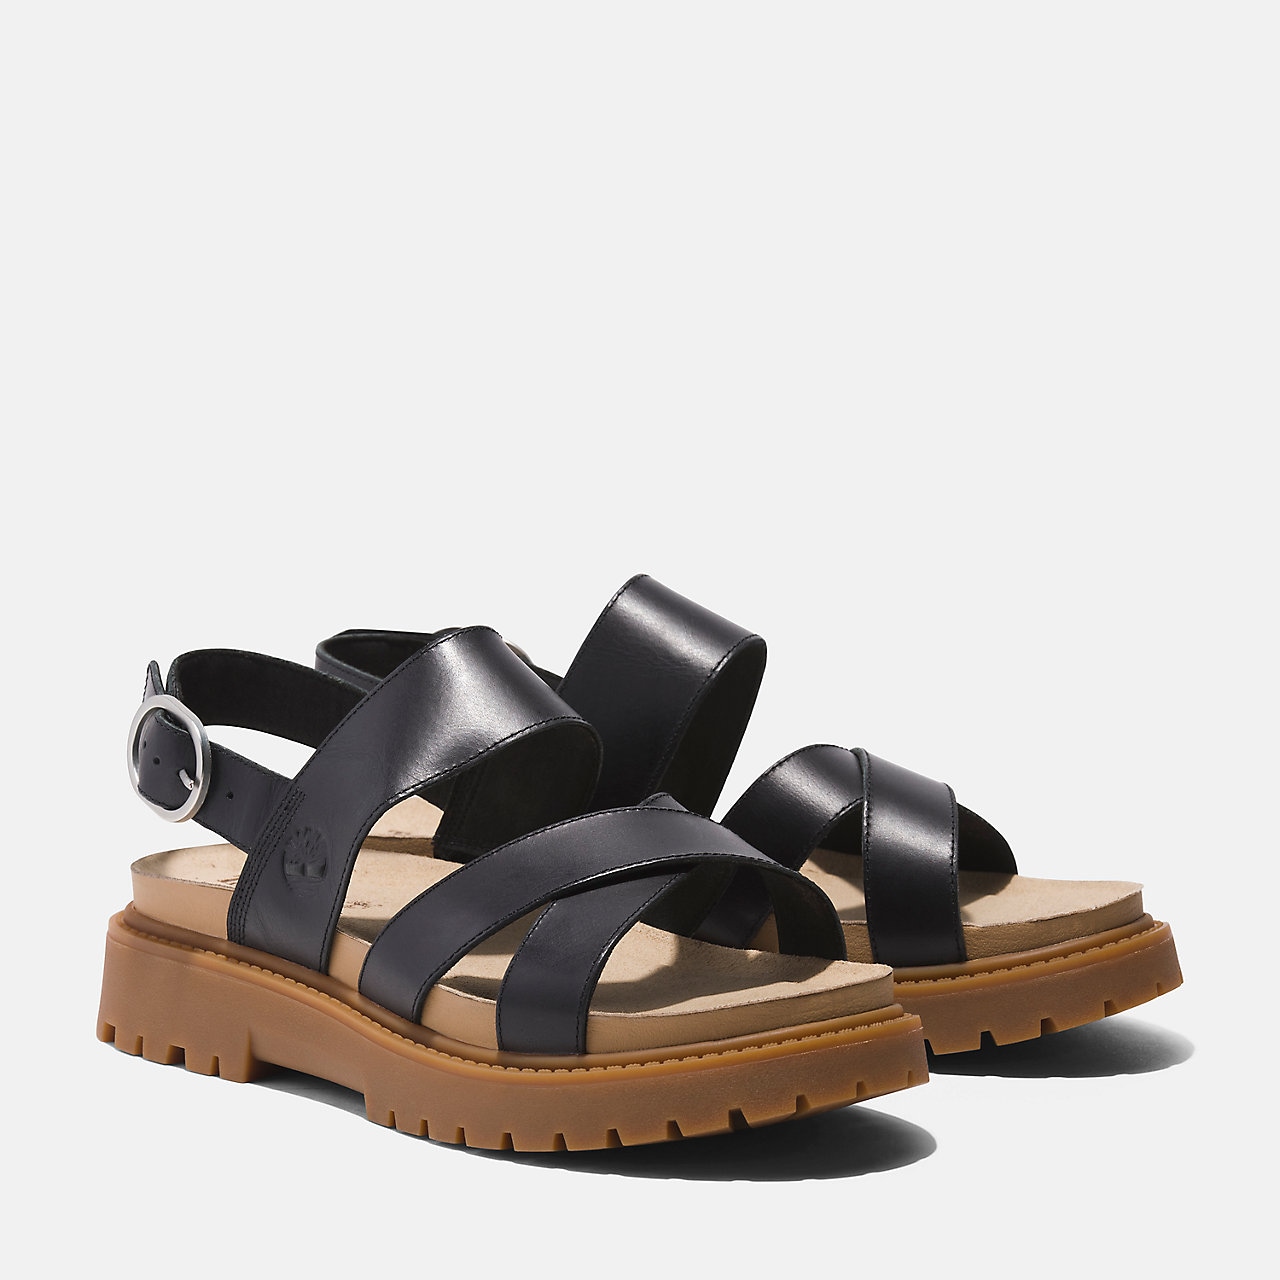 Timberland Sandale »Clairemont Way CROSS STRAP SANDAL« von Timberland